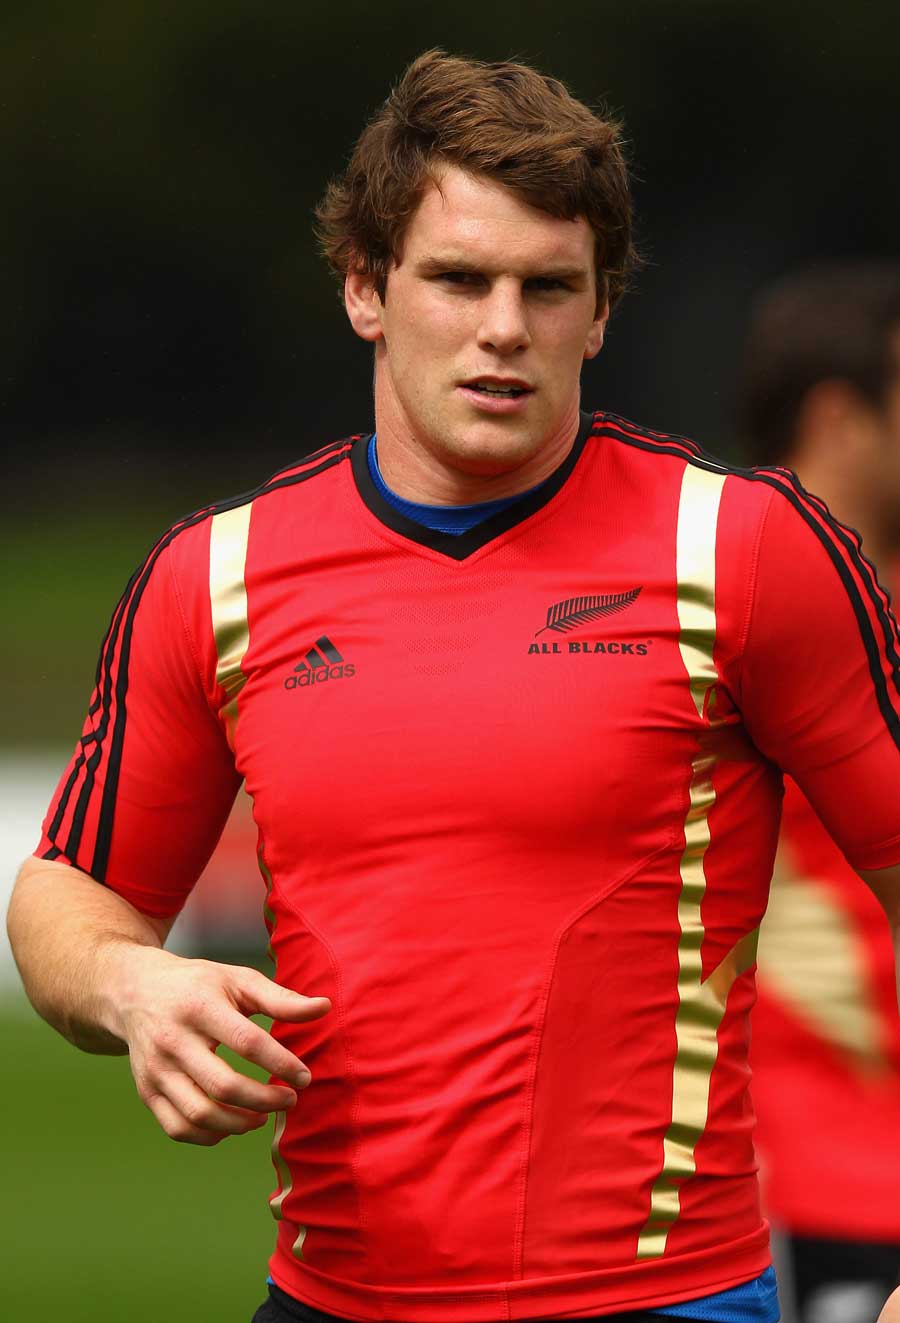 Matt Todd in action for the All Blacks at a training session